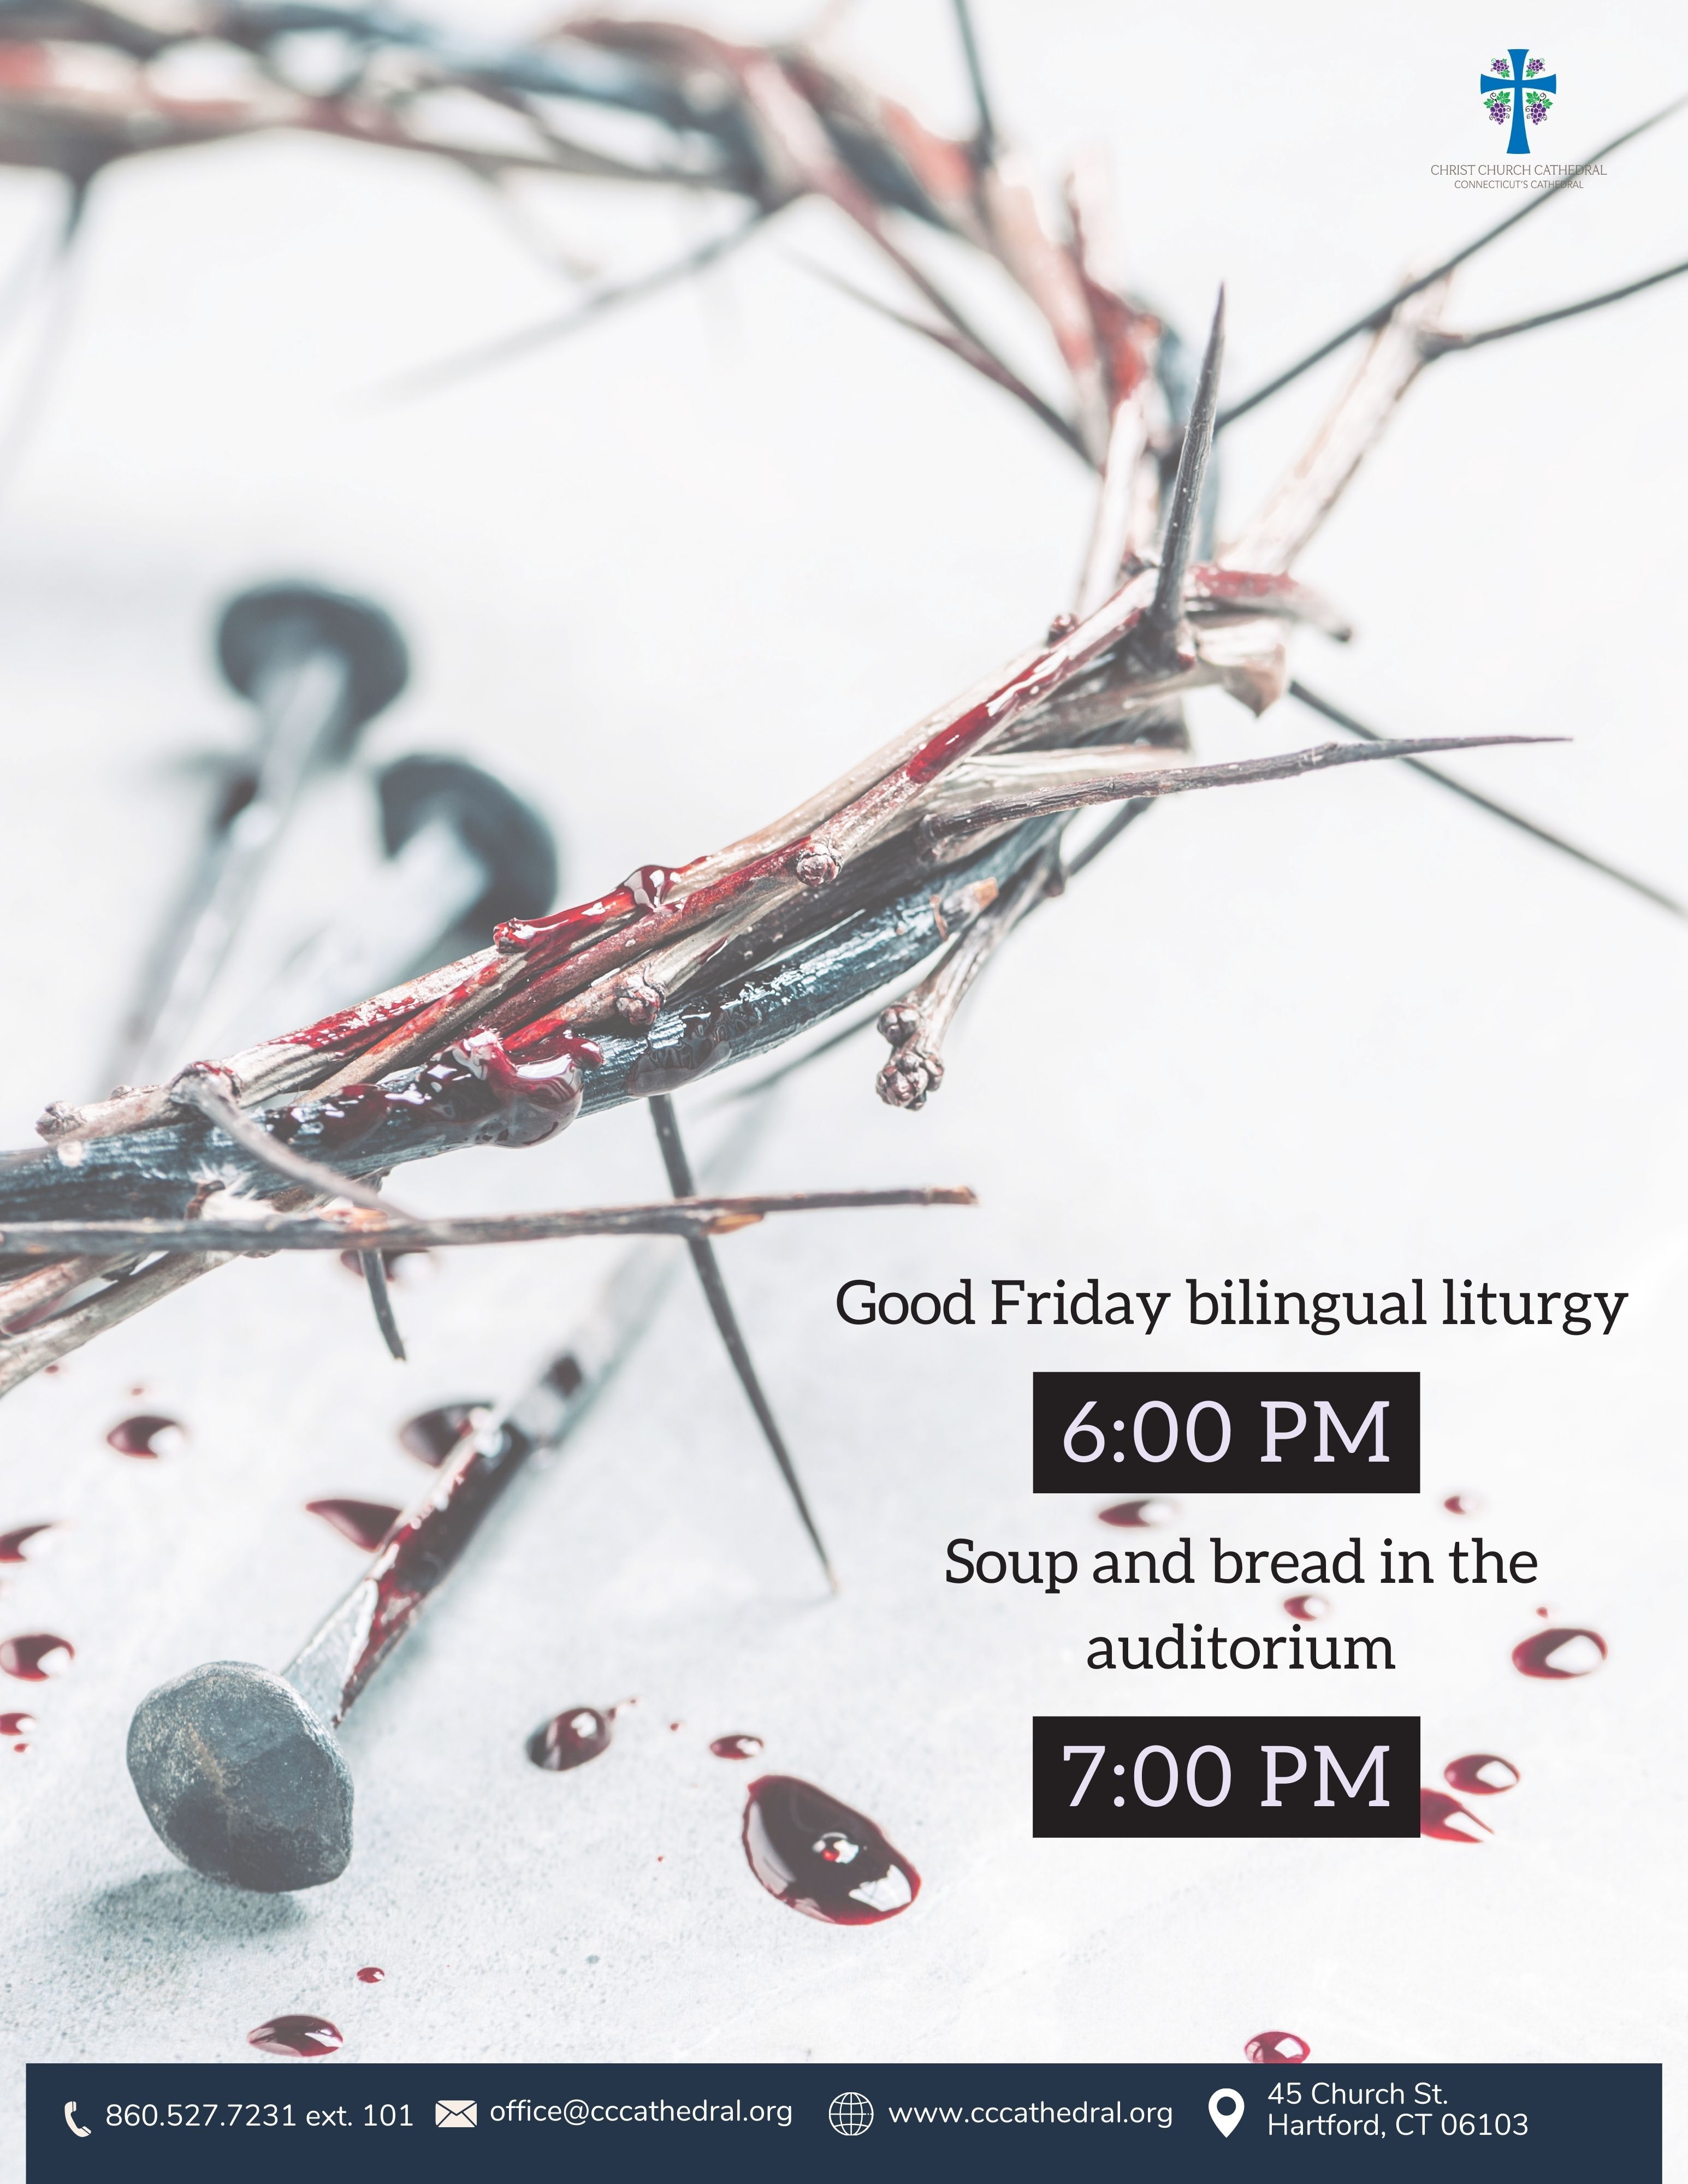 Good Friday bilingual liturgy/Soup and Bread in the auditorium